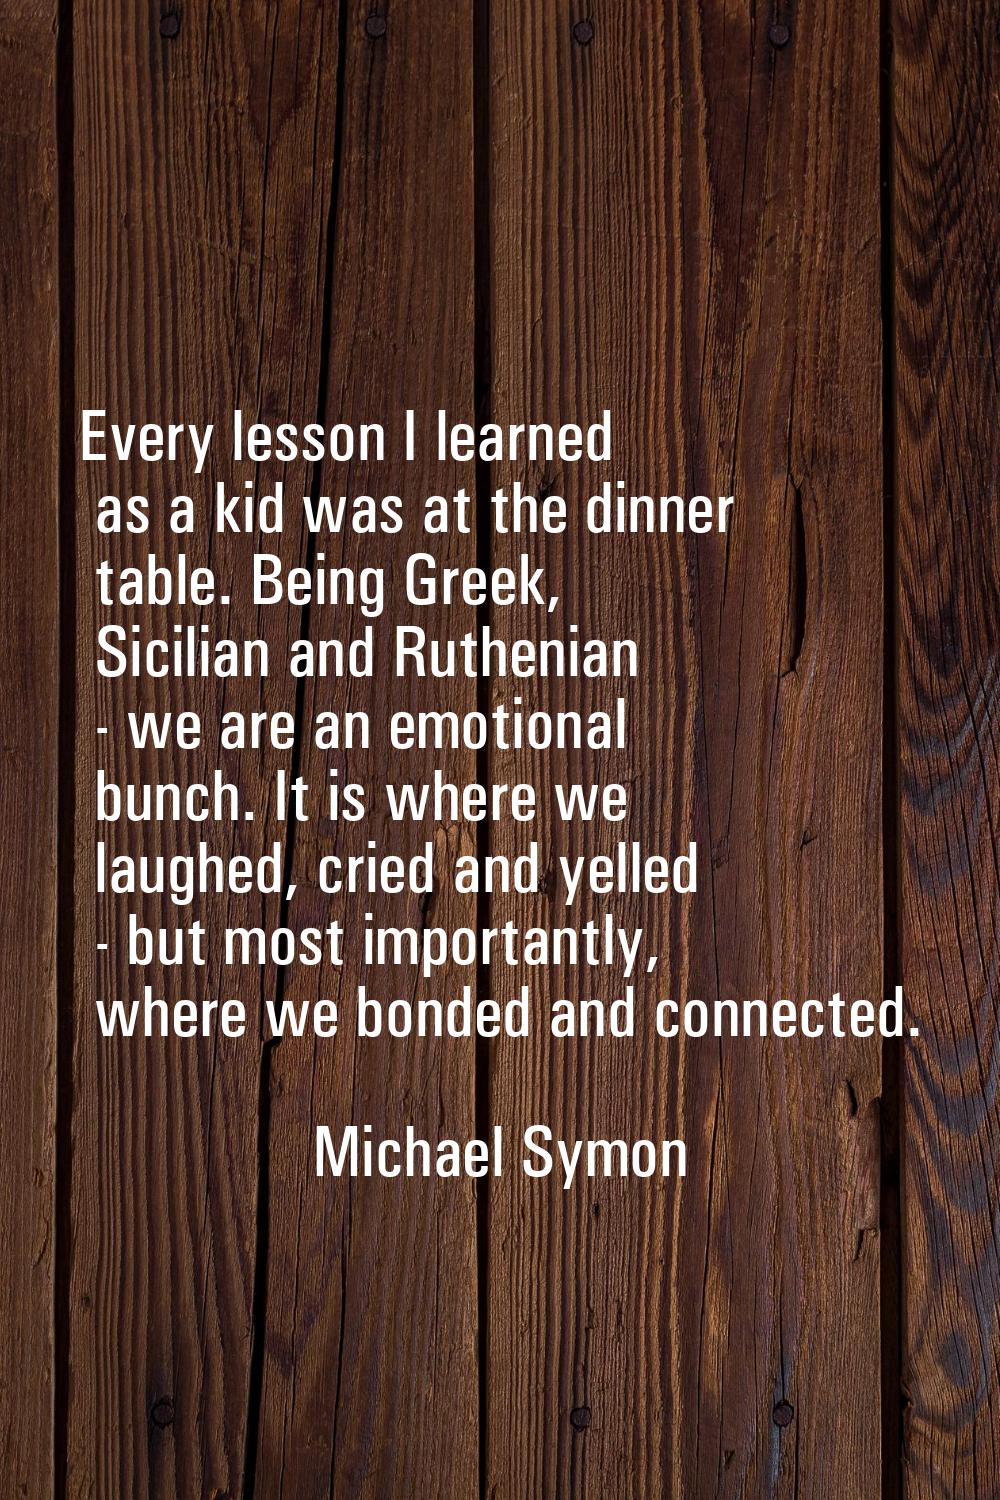 Every lesson I learned as a kid was at the dinner table. Being Greek, Sicilian and Ruthenian - we a